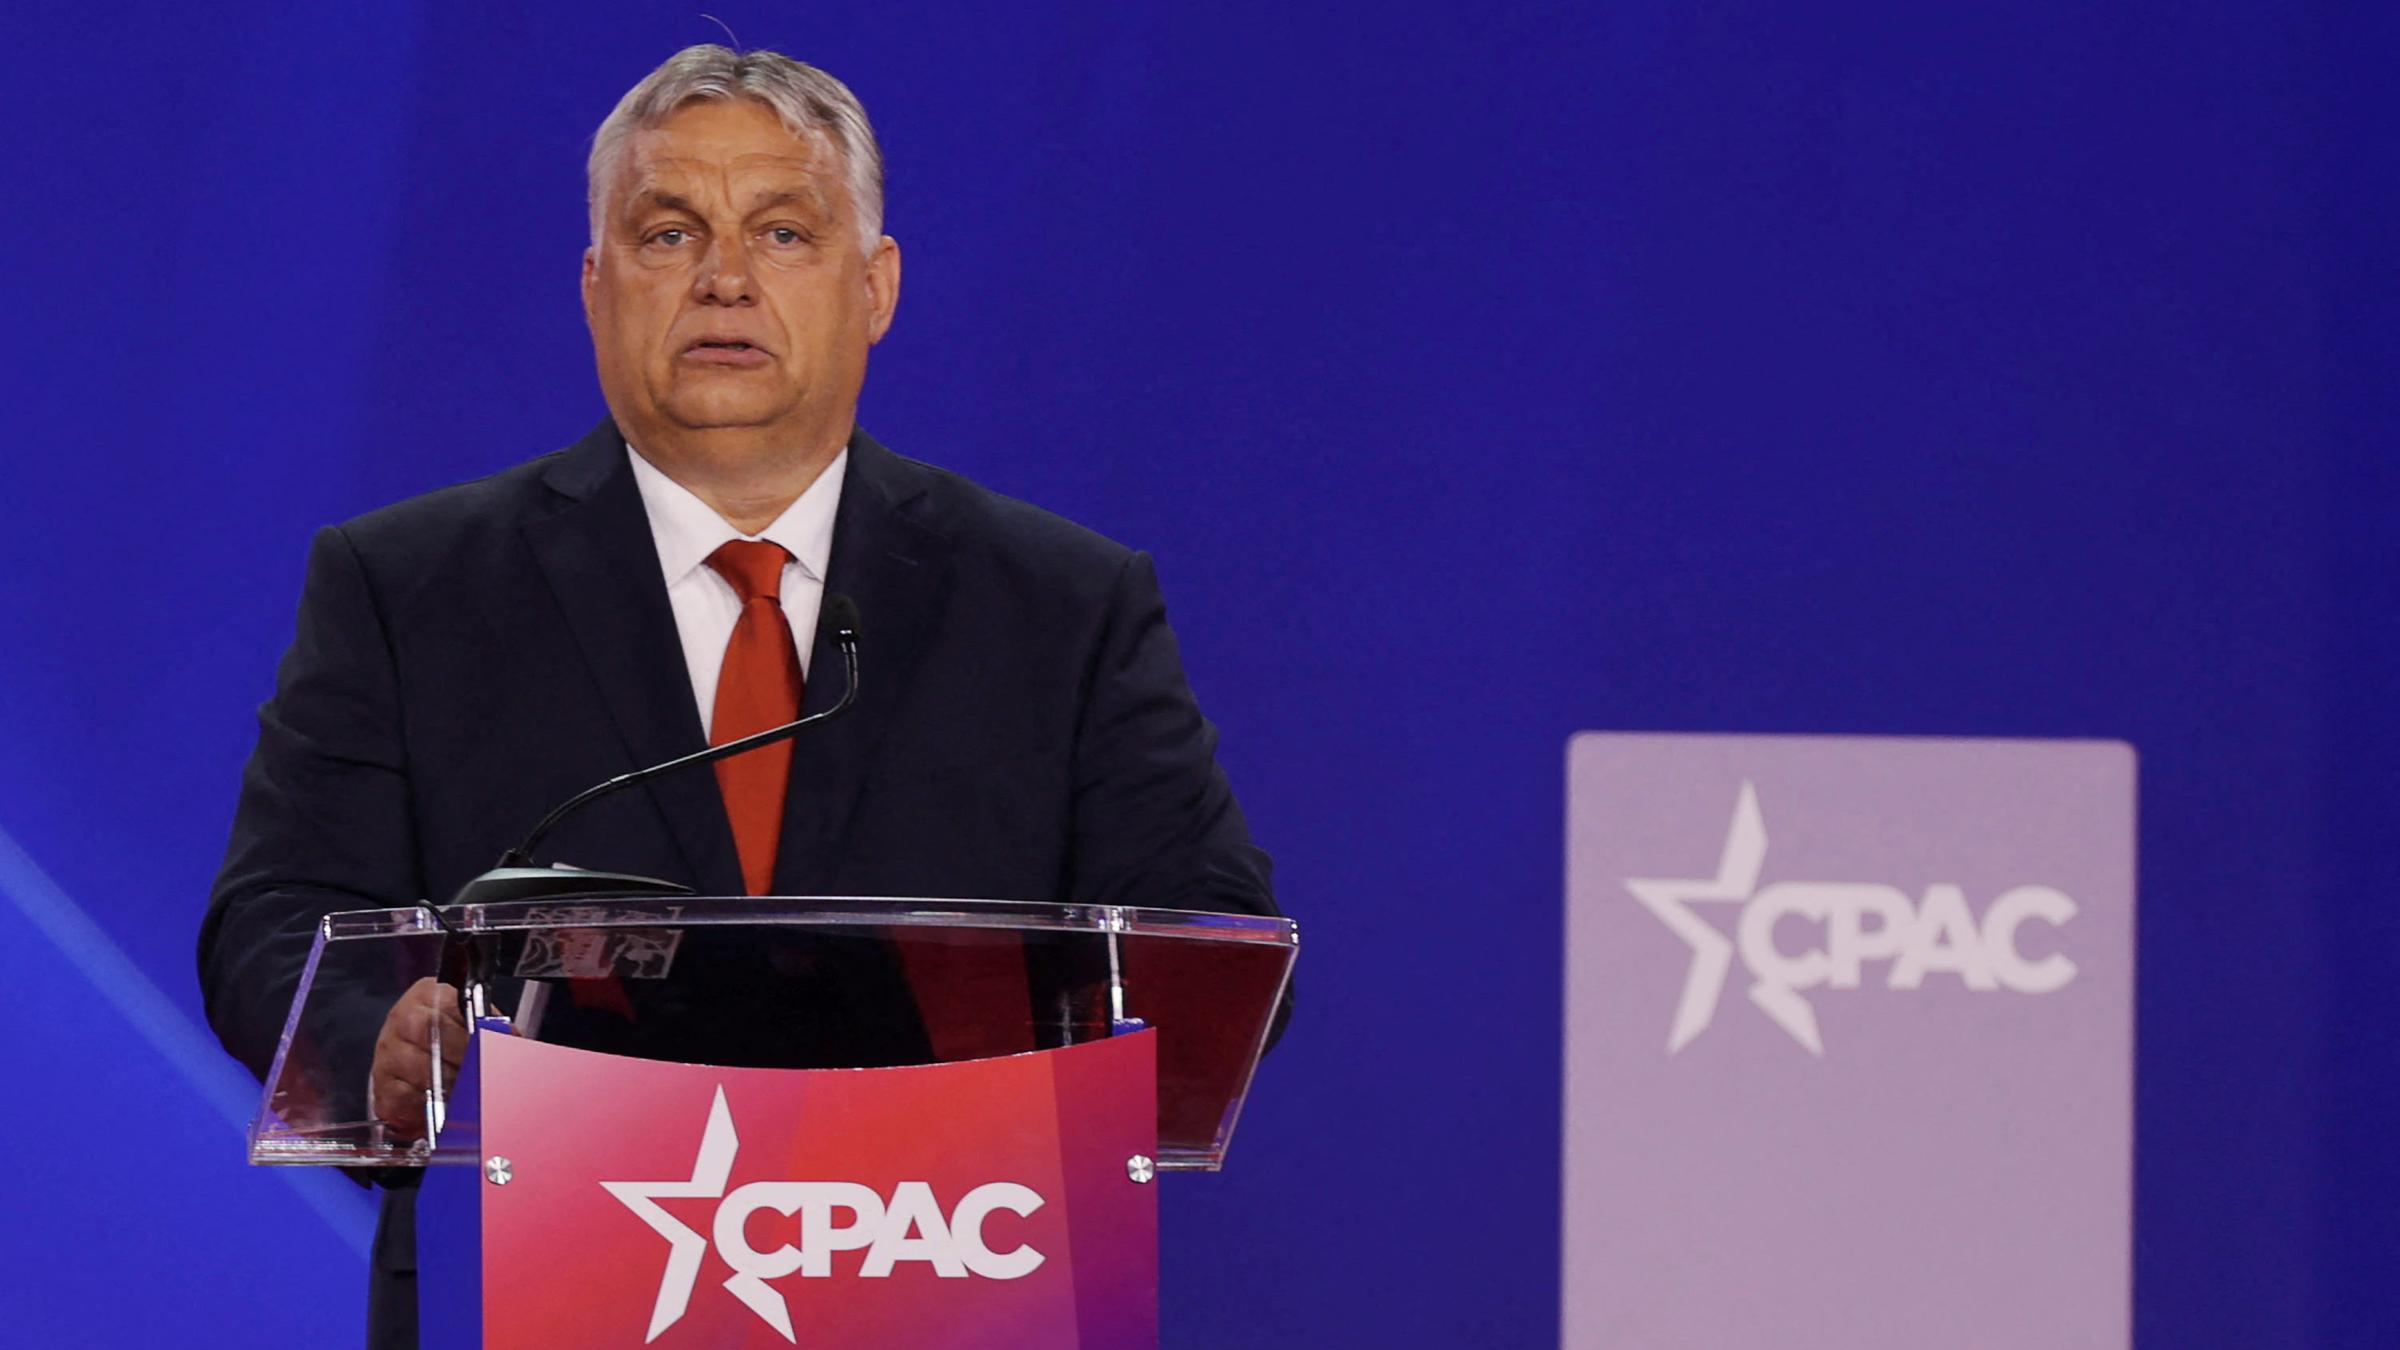 The 2022 Conservative Political Action Conference (CPAC) is held in Dallas